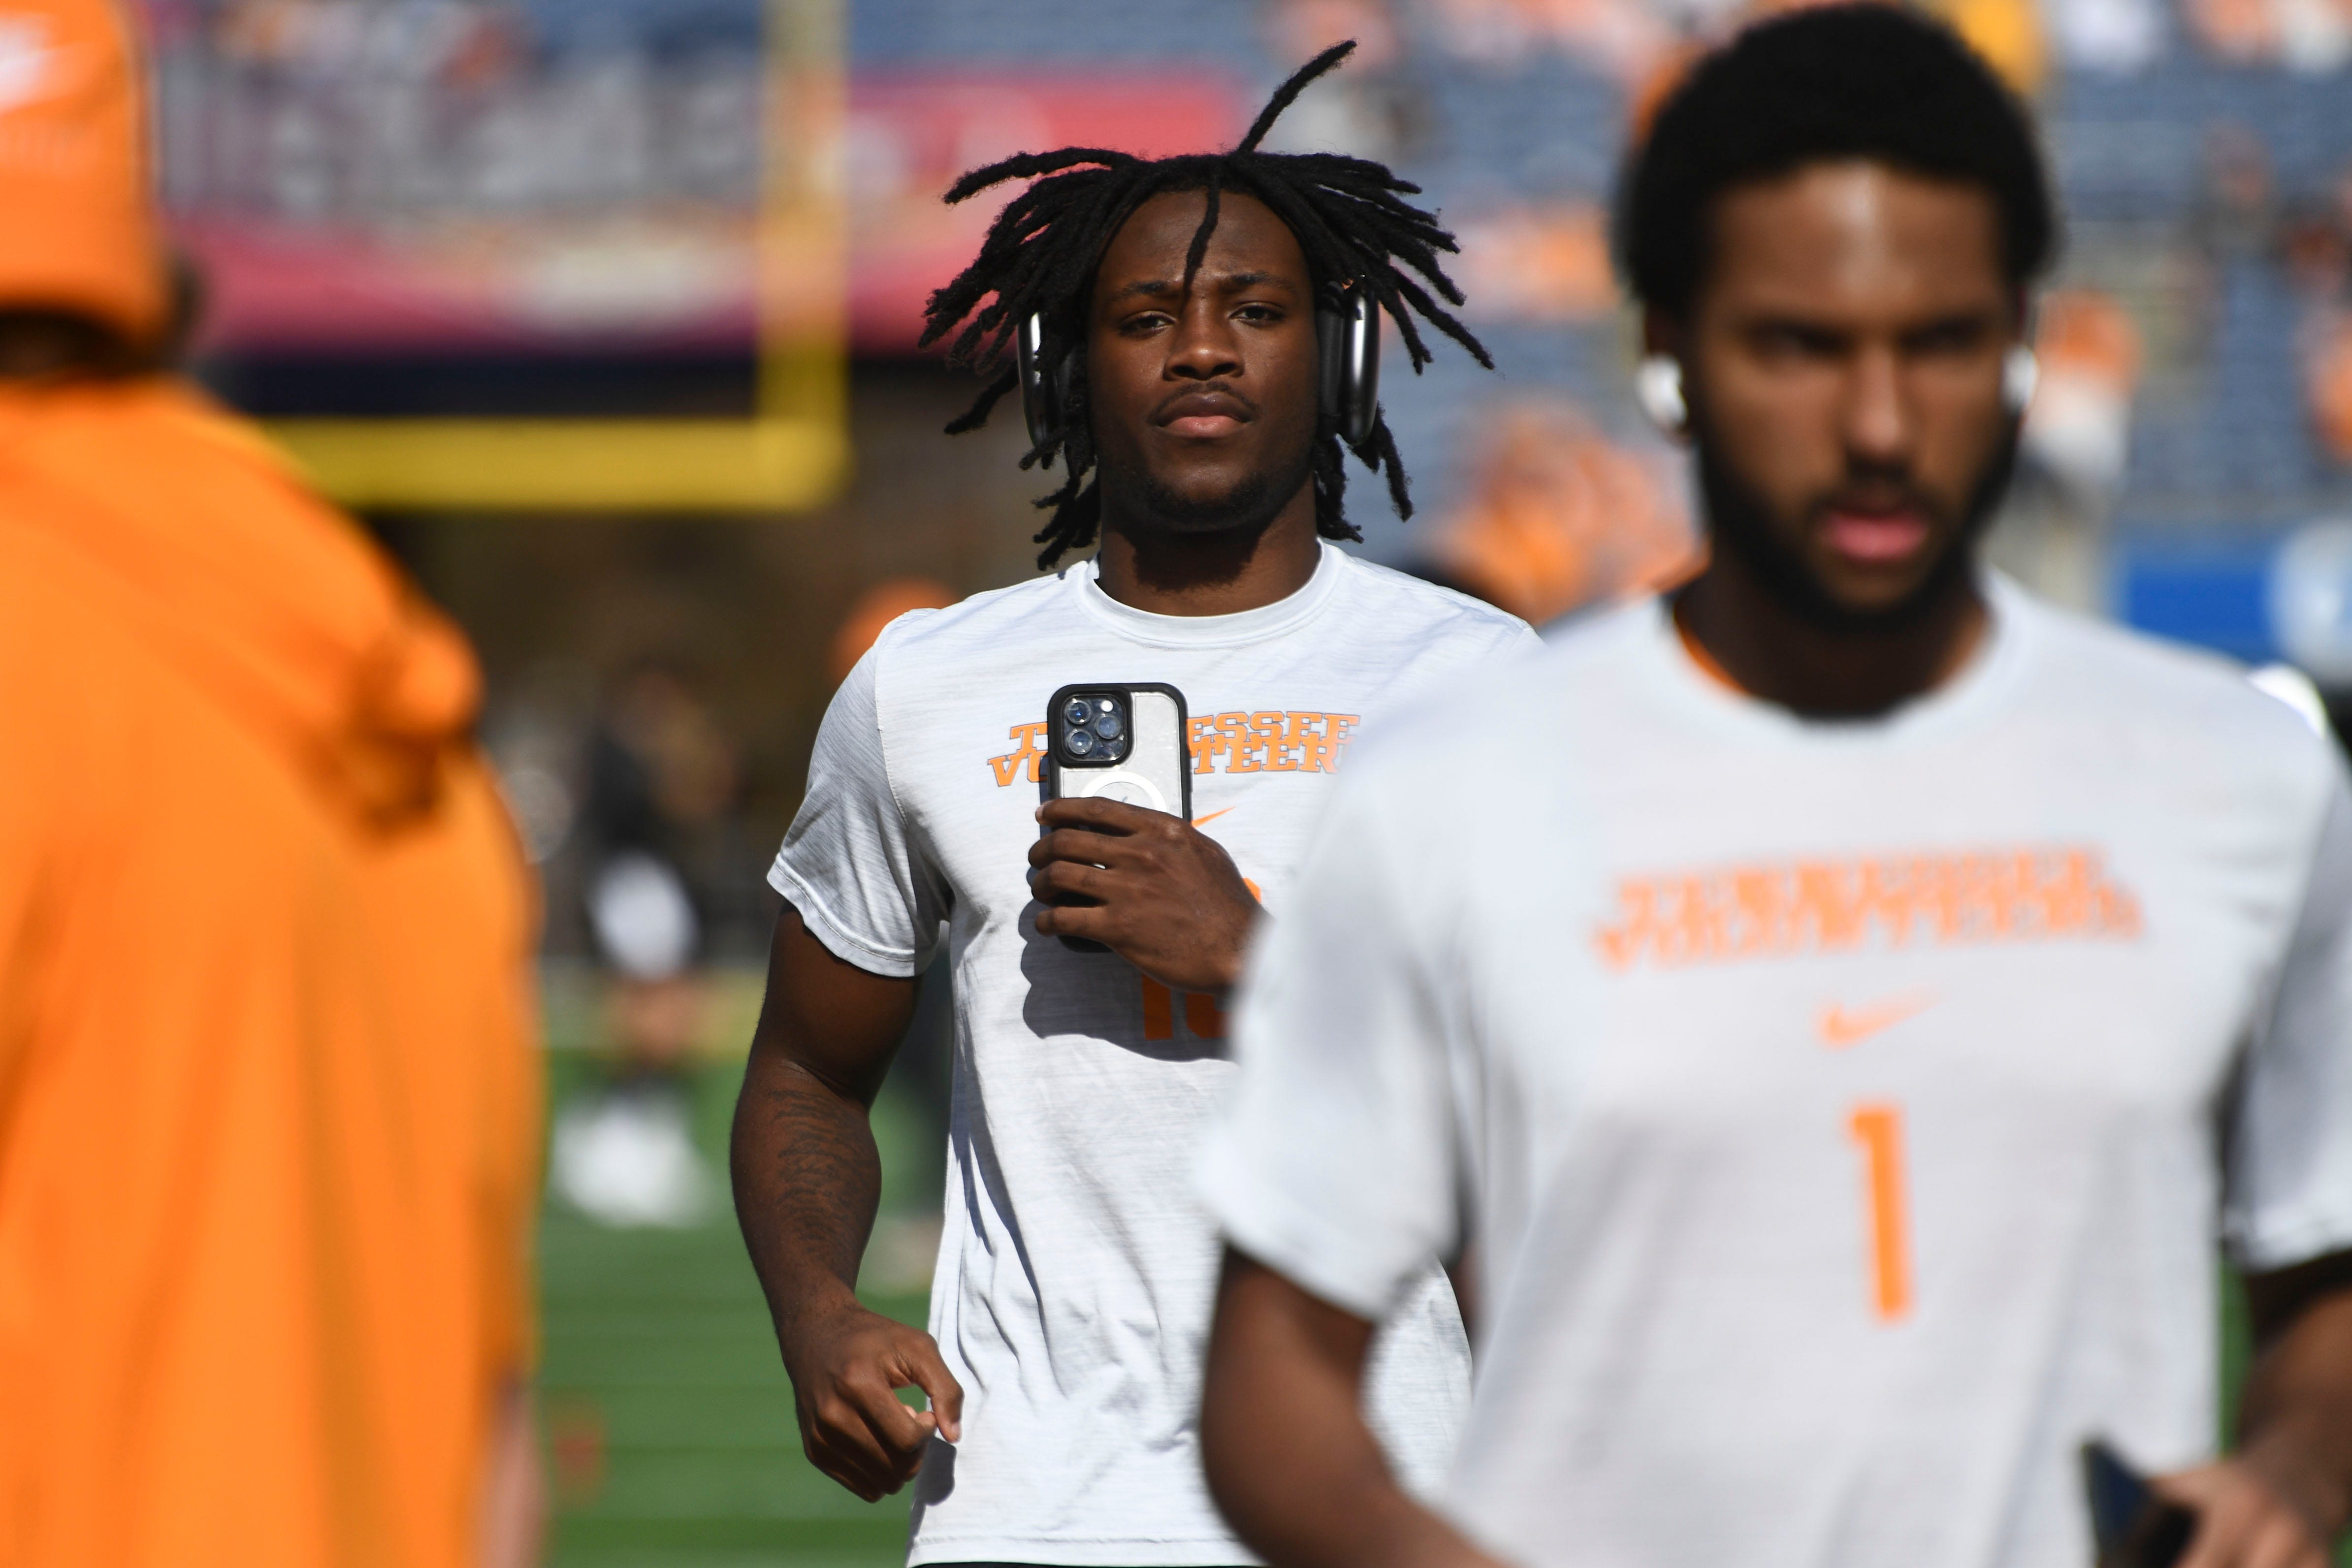 Tennessee Volunteers CB Rickey Gibson during warmups against Iowa. (Photo by Saul Young of the News Sentinel)